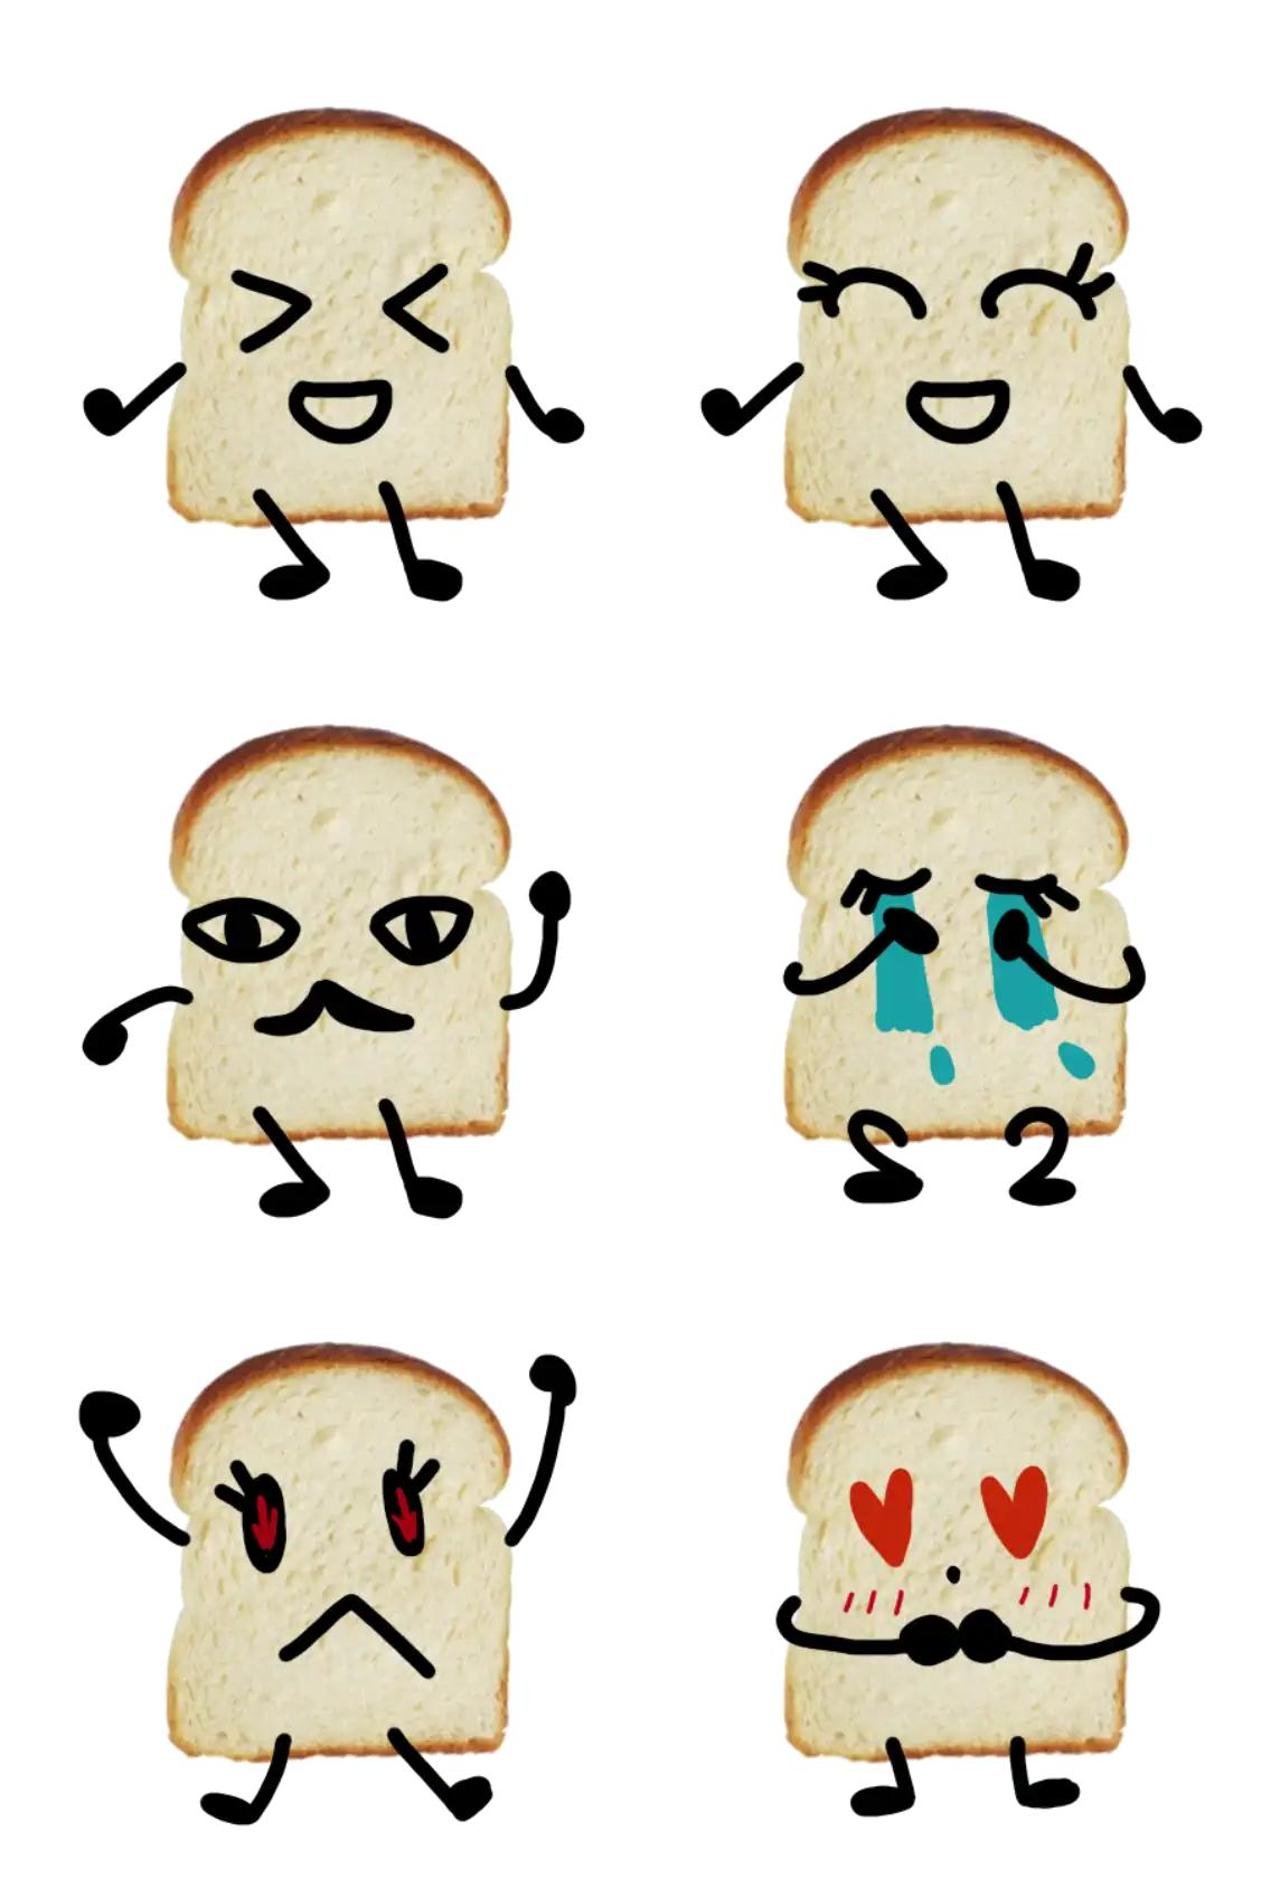 HELLO bread Animation/Cartoon,Gag sticker pack for Whatsapp, Telegram, Signal, and others chatting and message apps